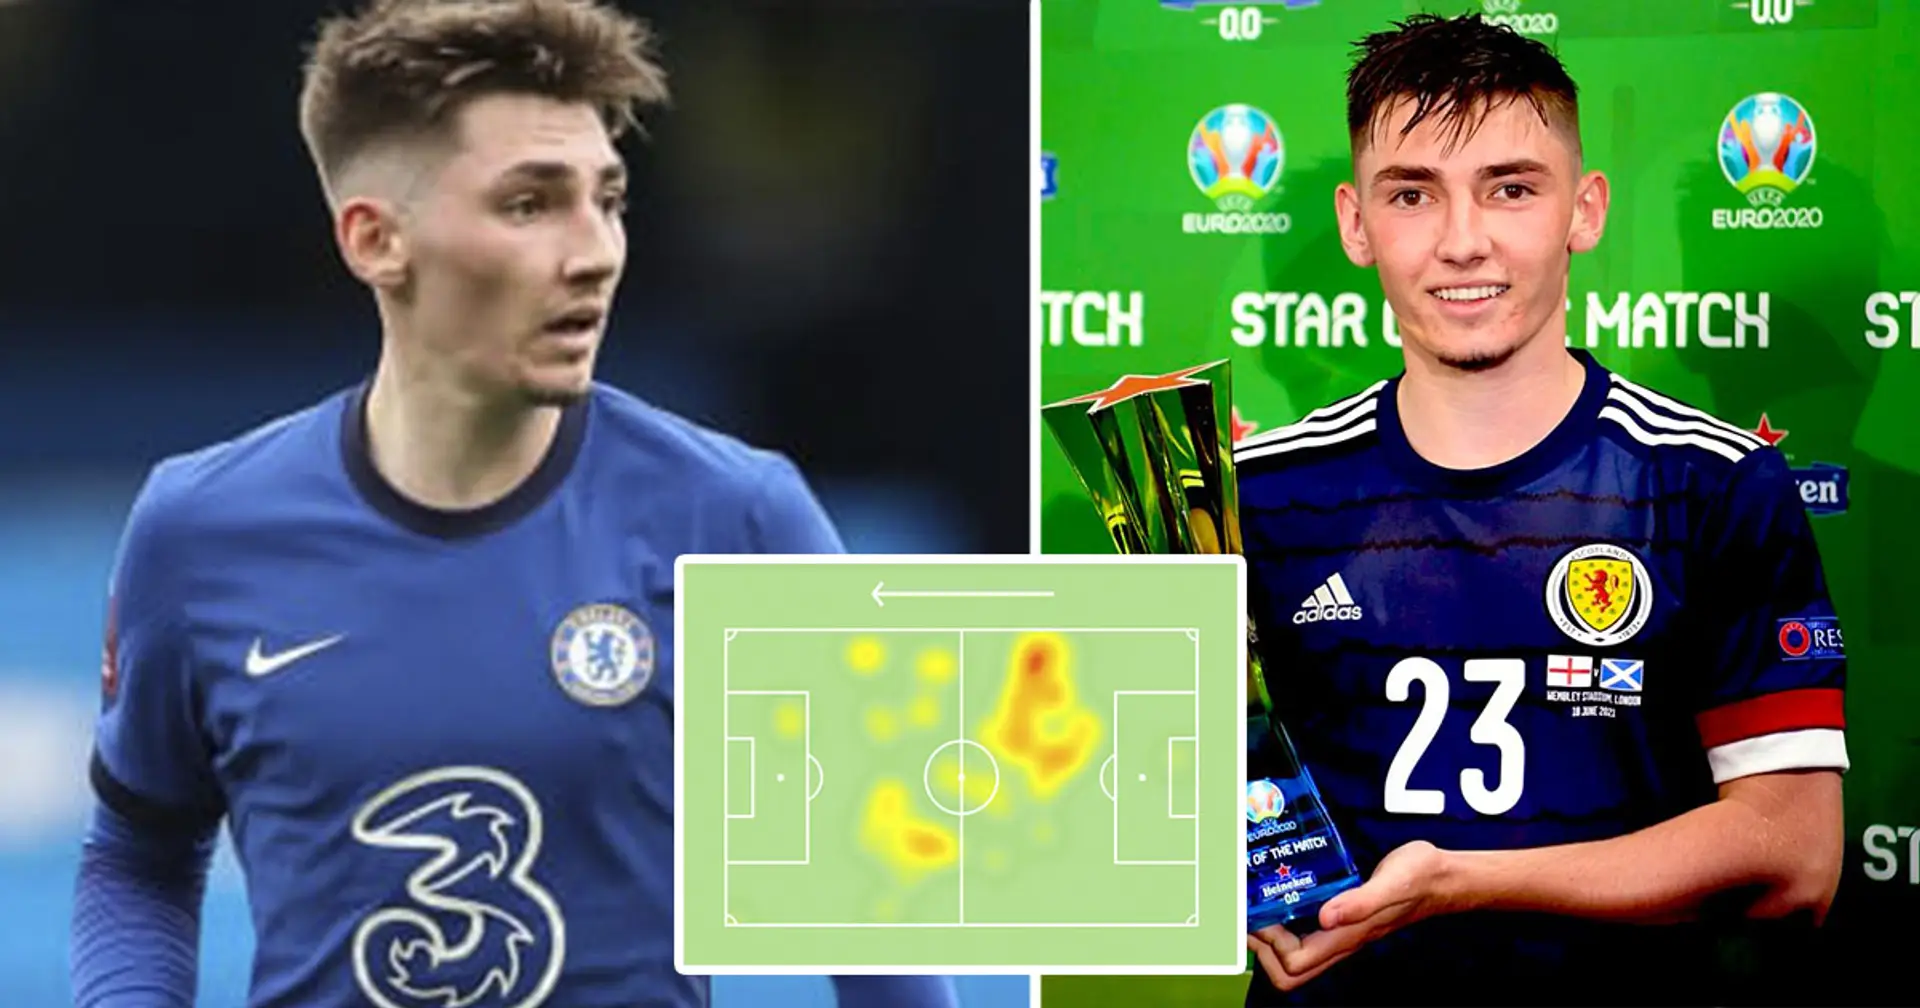 Scotland's Billy Gilmour wins Star of the Match vs England – he names Barca legend his idol and it's not Messi